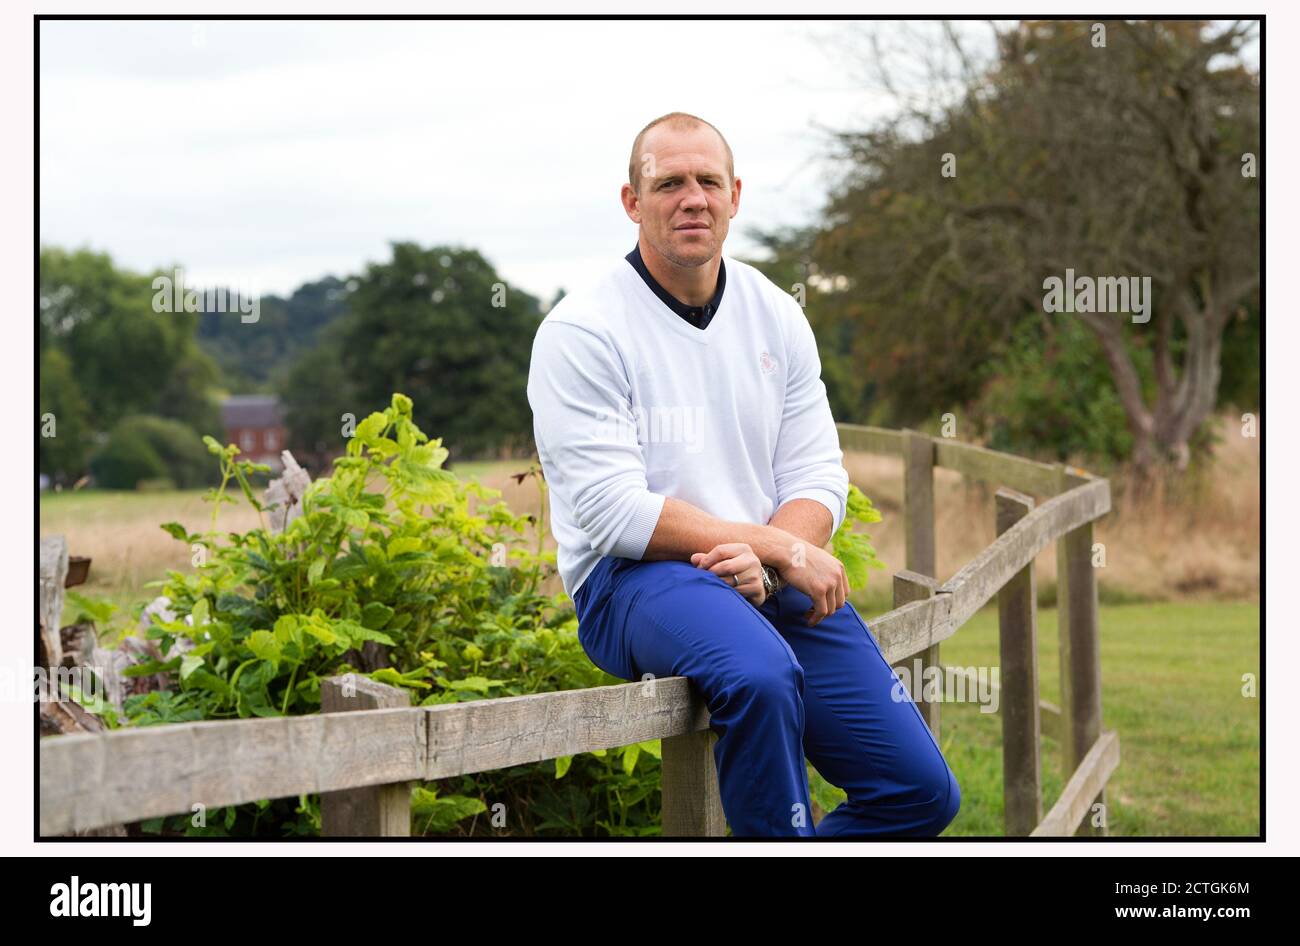 GLOUCESTER PLAYER-COACH E EX ENGLAND RUGBY PLAYER MIKE TINDALL GIOCANDO A GOLF AL BUCKINGHAMSHIRE. IMMAGINE DI CREDITO : © MARK PAIN / ALAMY Foto Stock